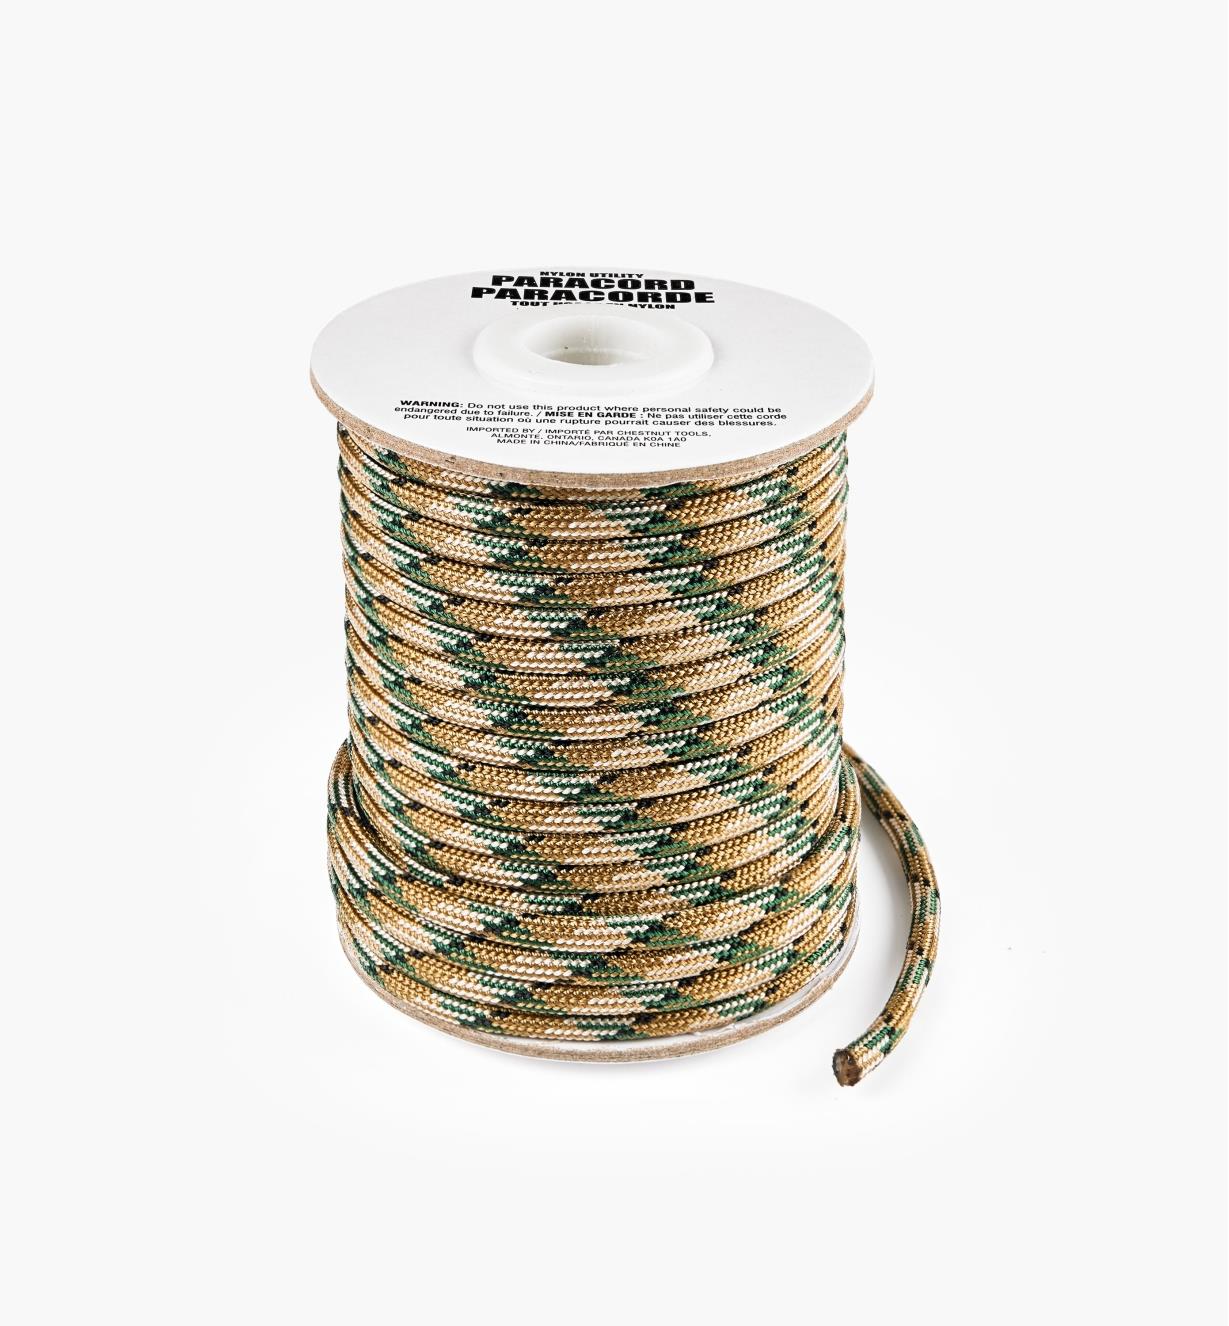 09A0715 - 50’ Paracord, Camouflage Brown